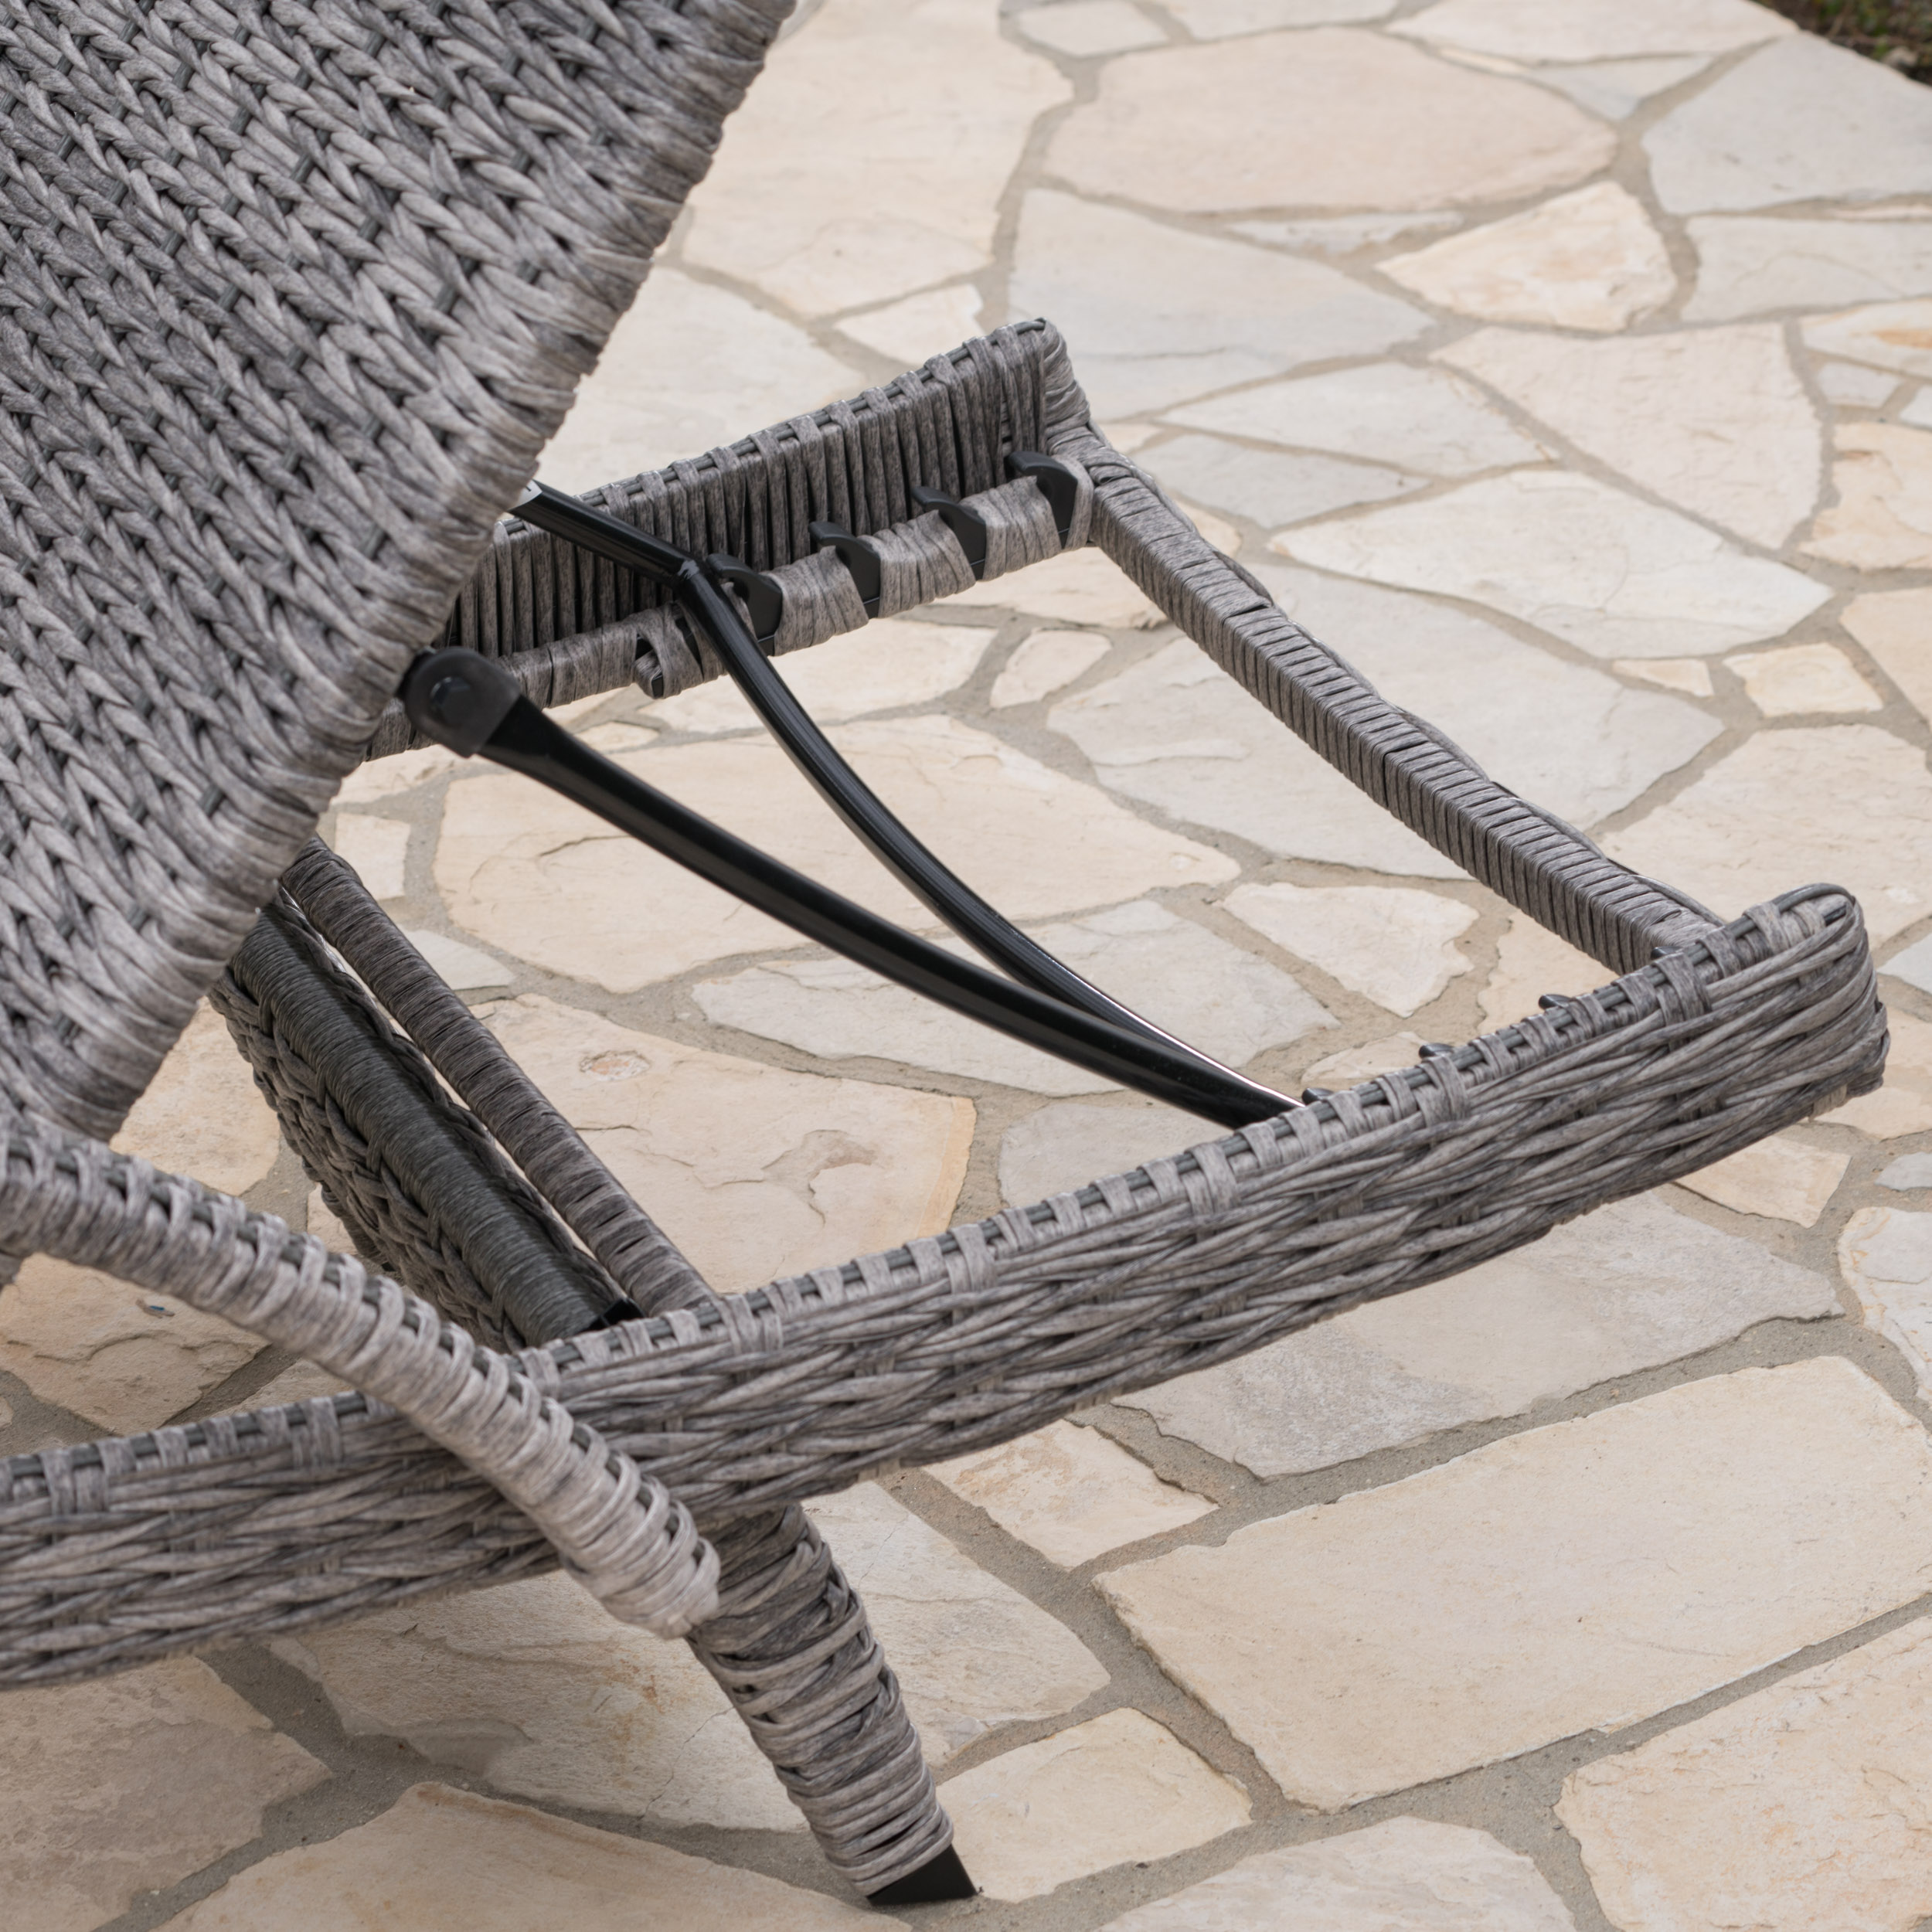 Emerald Outdoor 3 Piece Armed Wicker Chaise Lounges with Rectangular Side Table, Grey - image 5 of 6